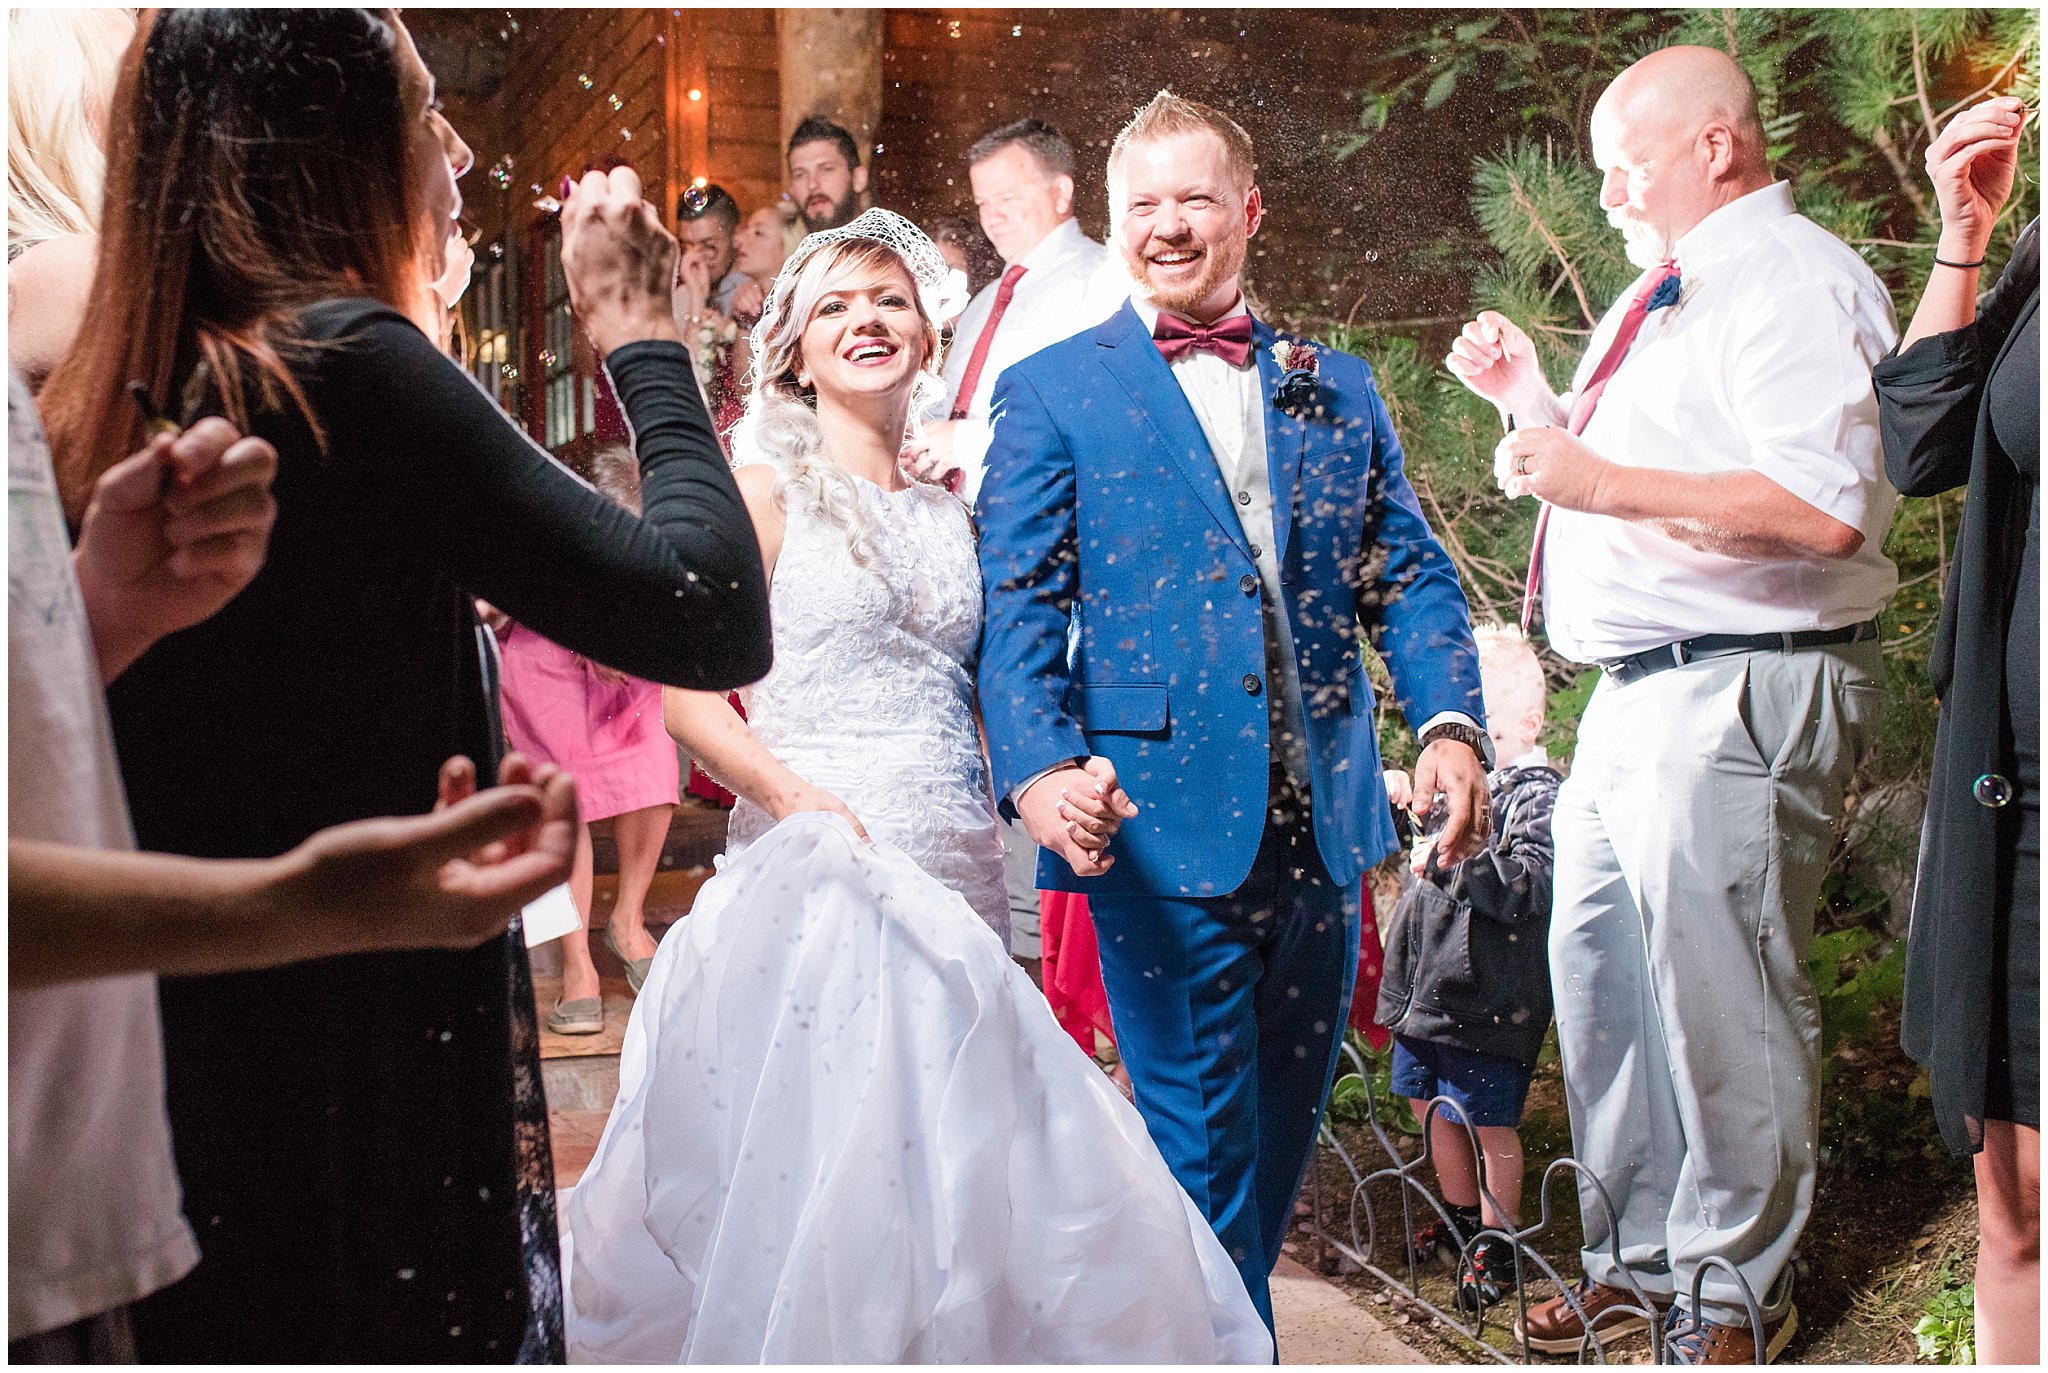 Bride and groom wedding exit sendoff with bubbles and lavender buds | Log Haven Summer Mountain Wedding | Jessie and Dallin Photography